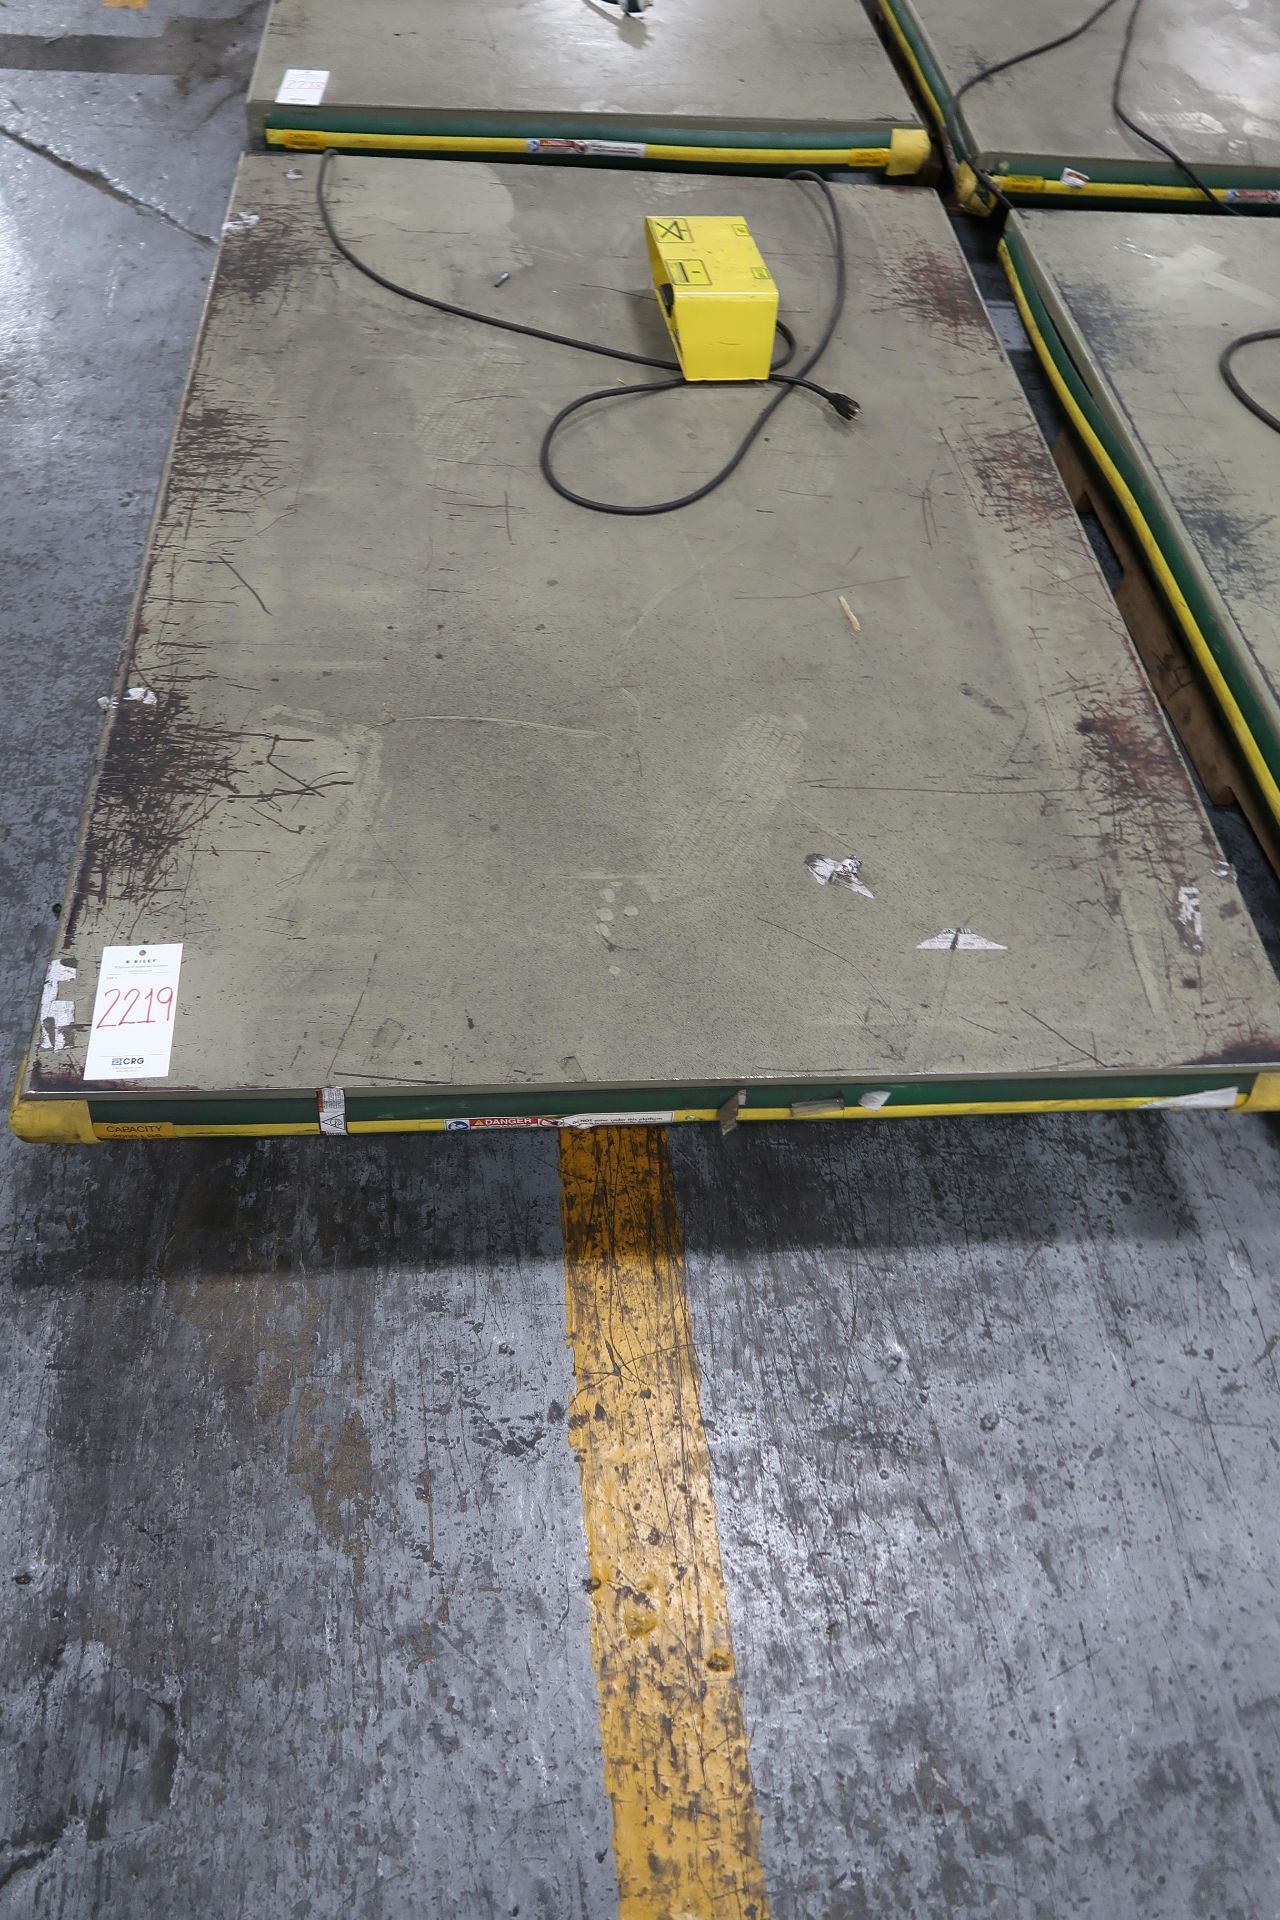 2000 lb. lift table with foot pedal; 48" x 72"